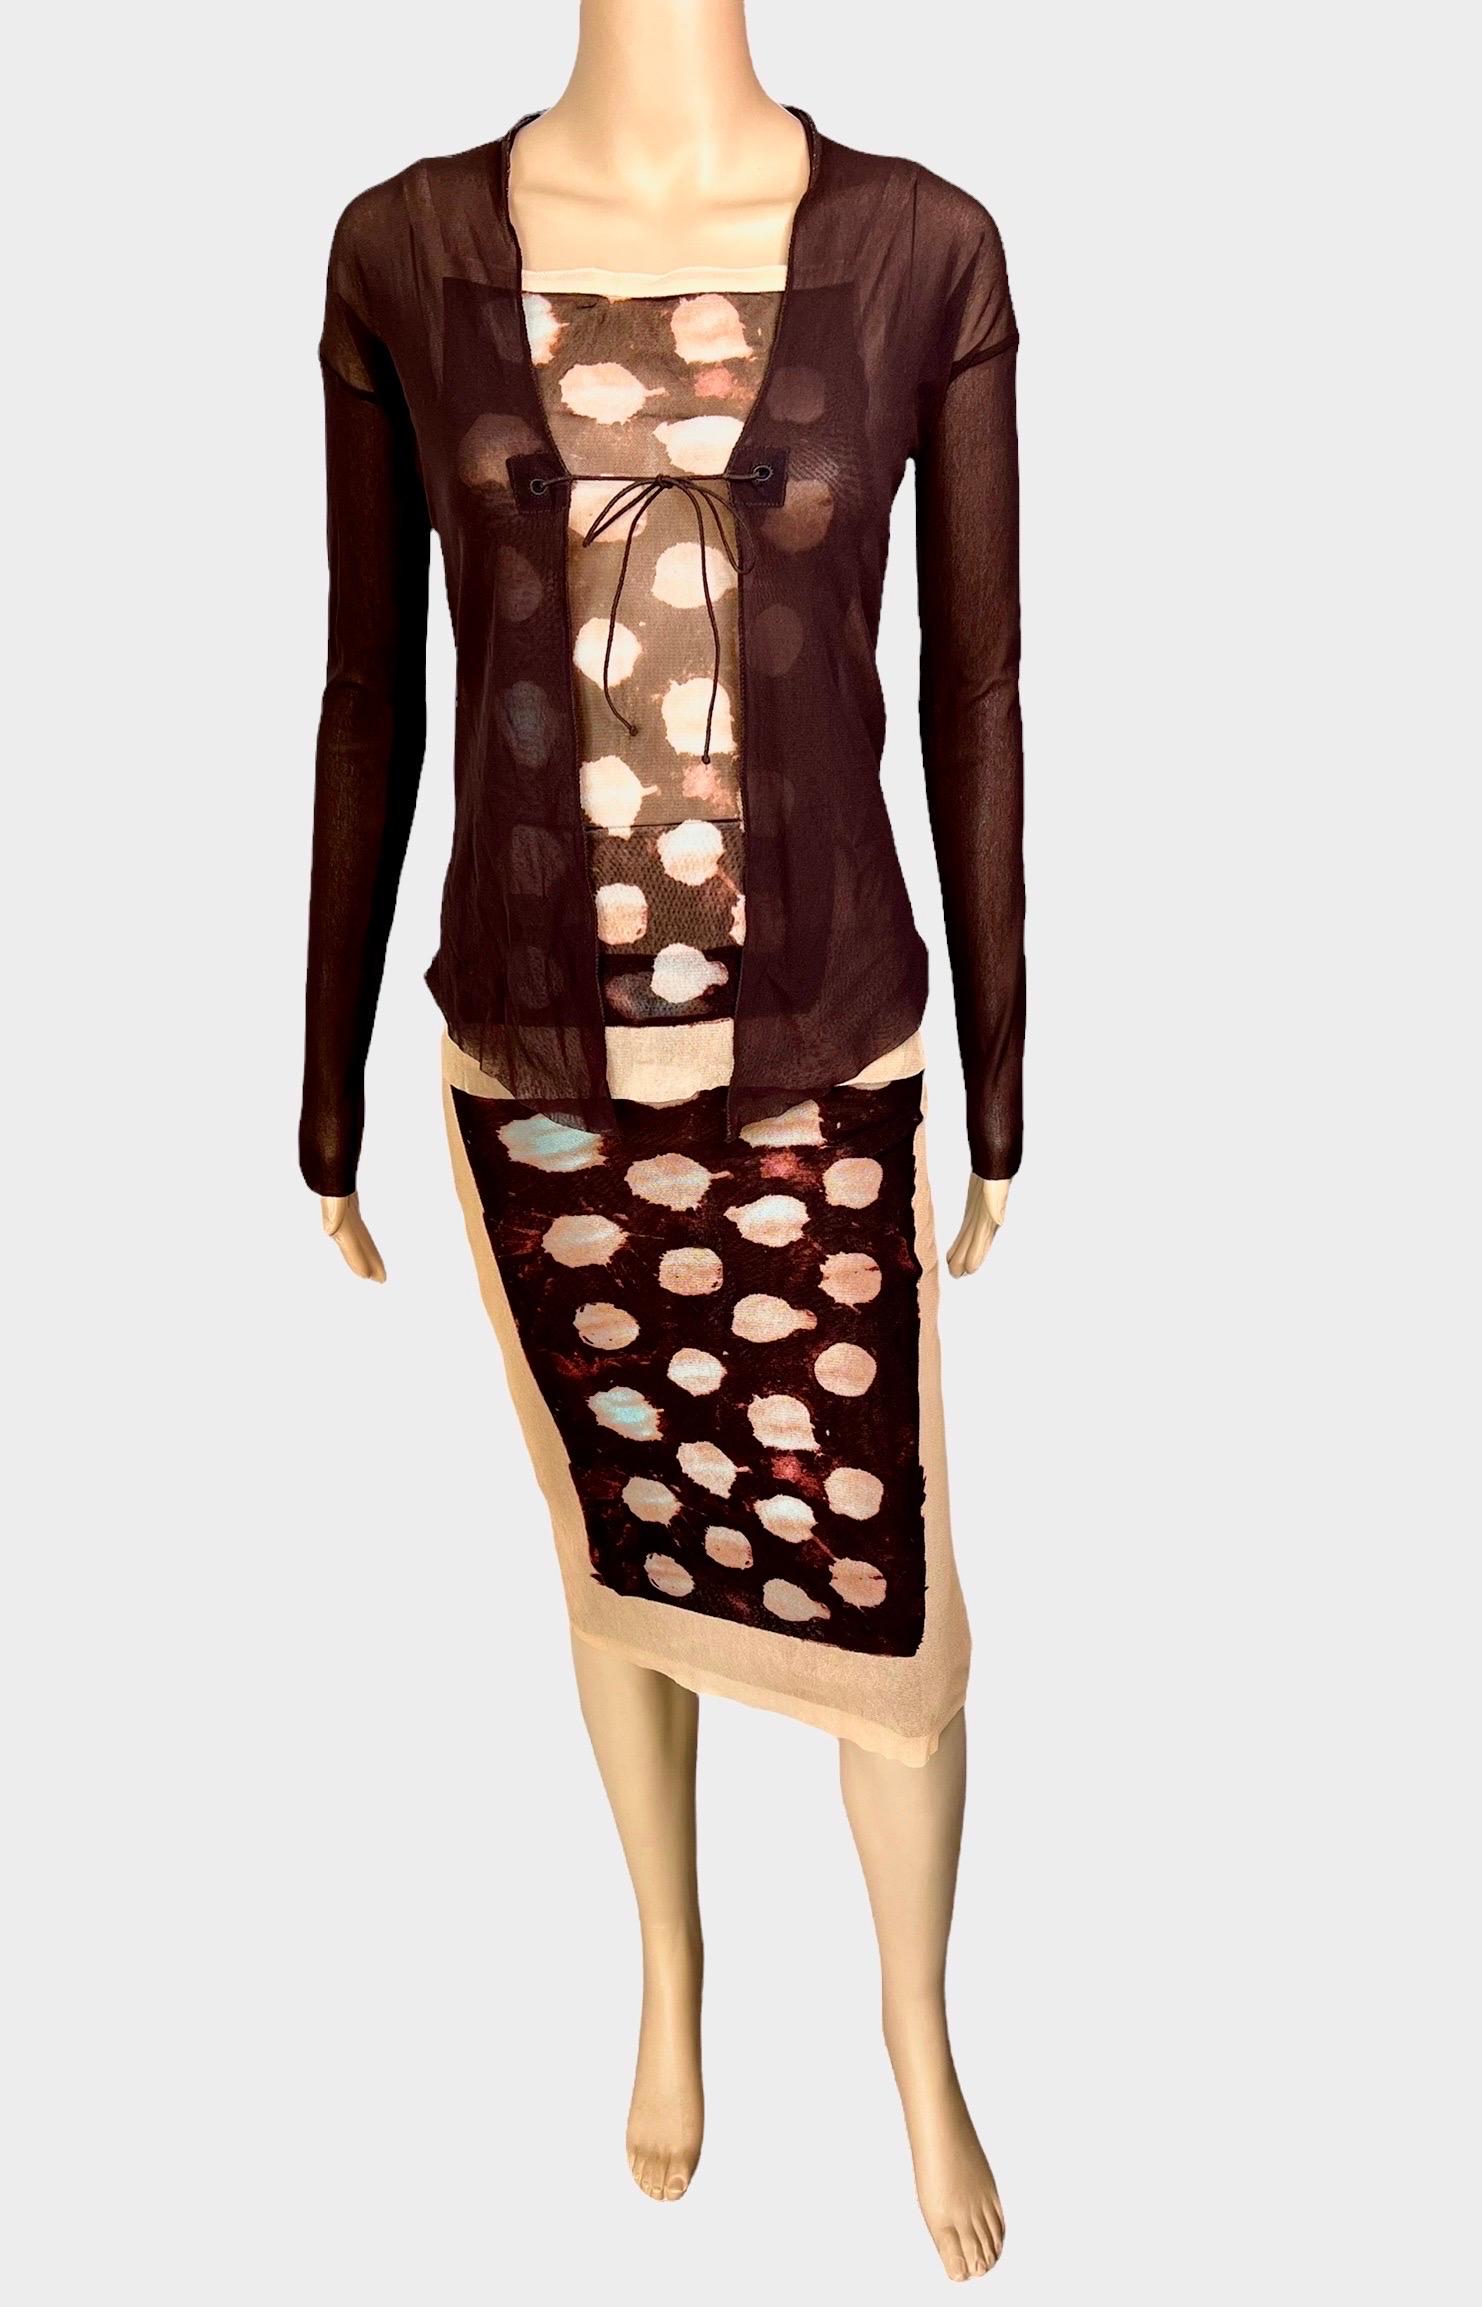 Jean Paul Gaultier S/S 2001 Sheer Polka Dot Cardigan Top and Skirt 3 Piece Set For Sale 4